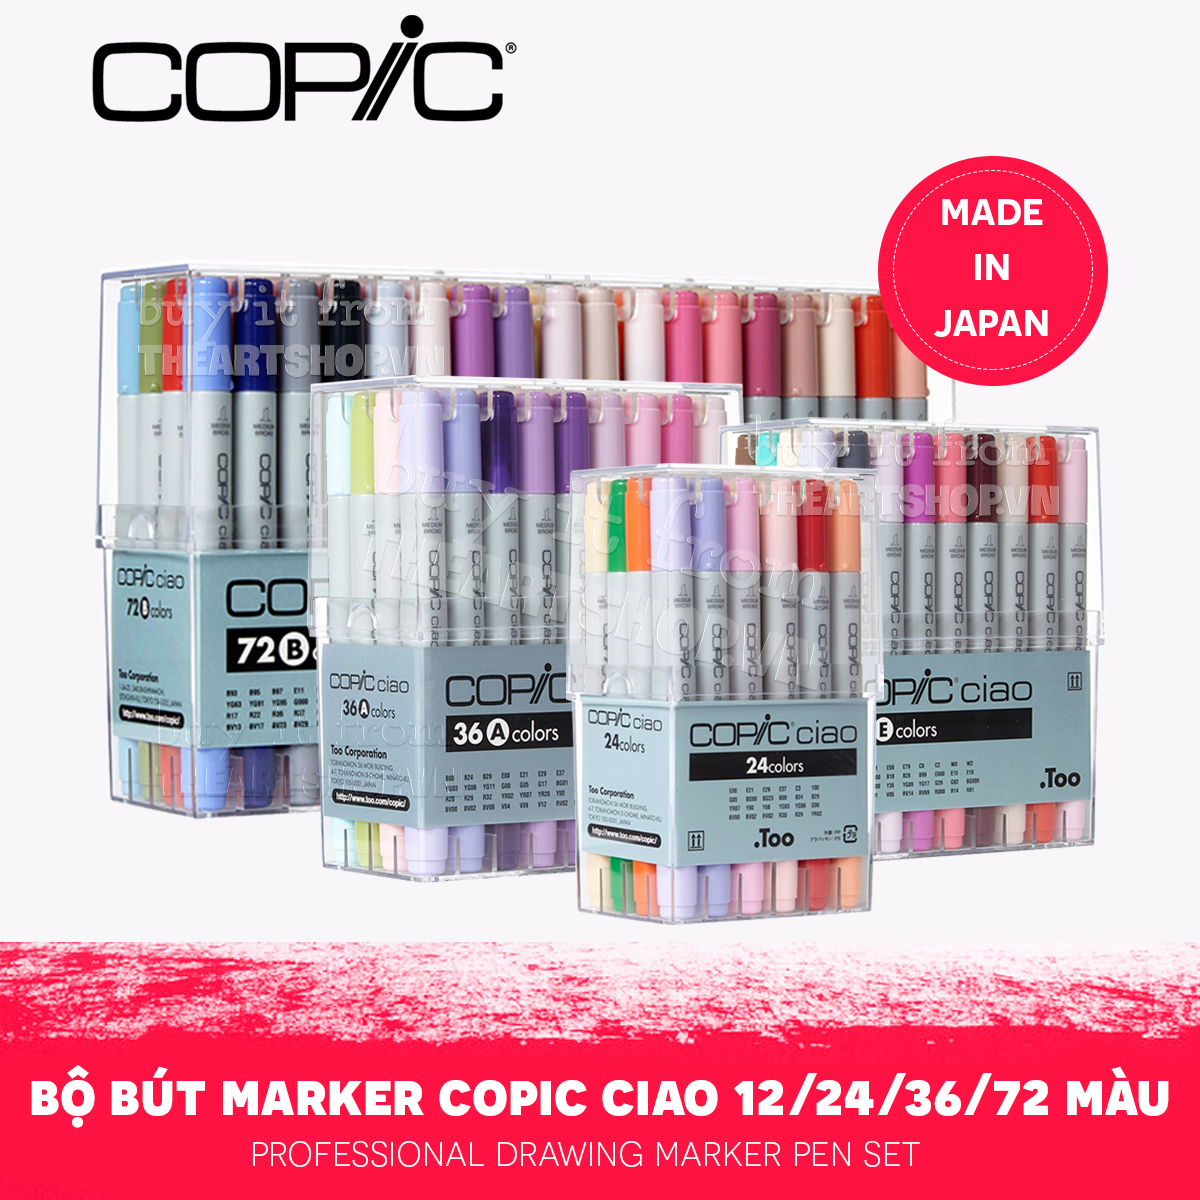 ScrawlrBox #074 - Copic Sketch Markers